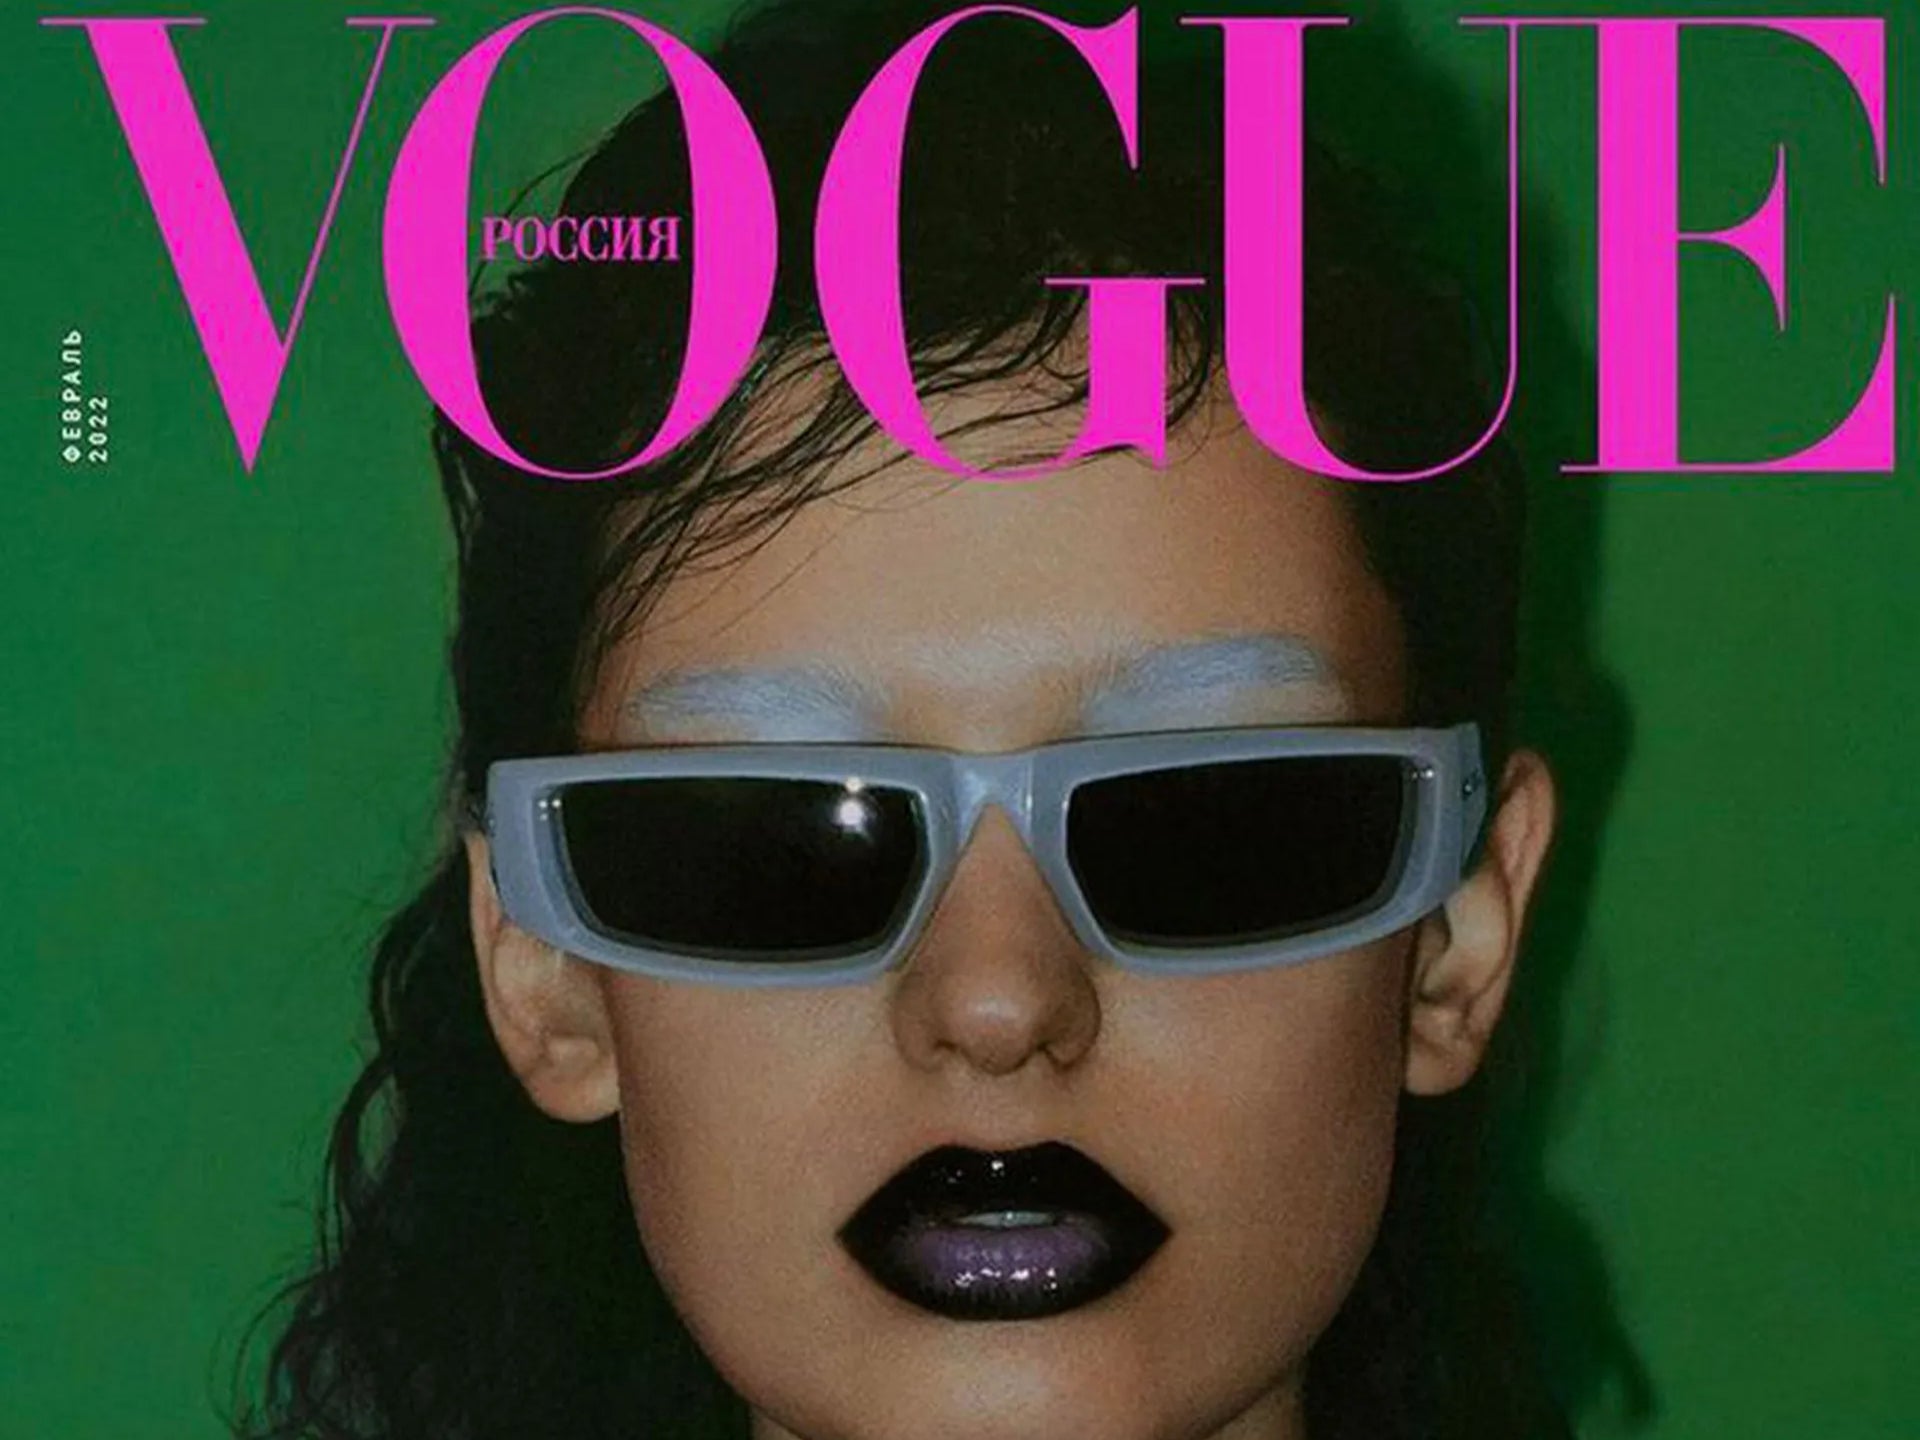 Vogue Russia has been closed by Conde Nast